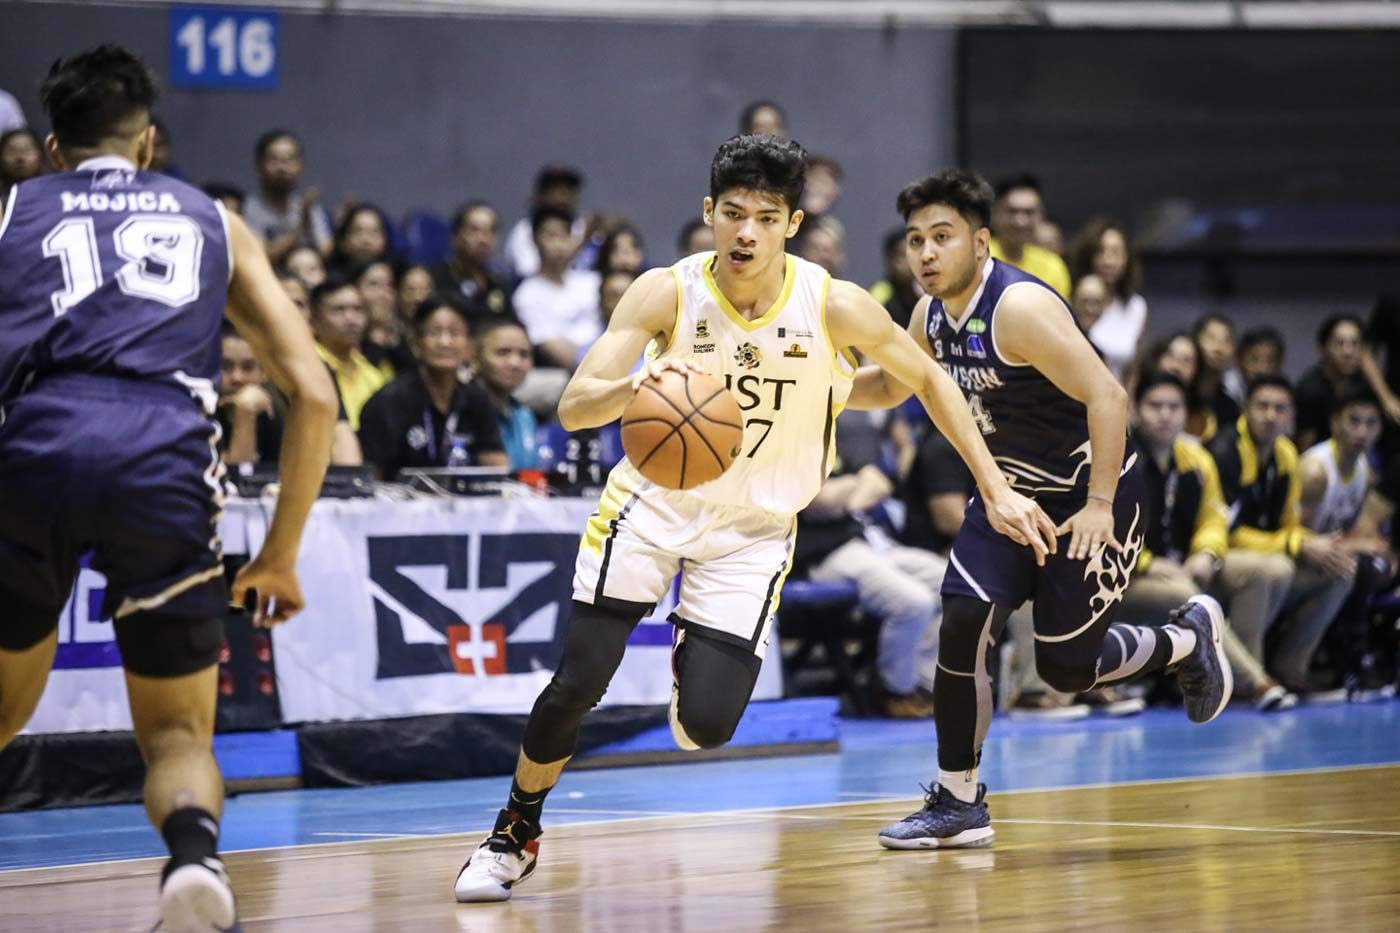 No regrets for Cansino after stellar UAAP season ended by injury